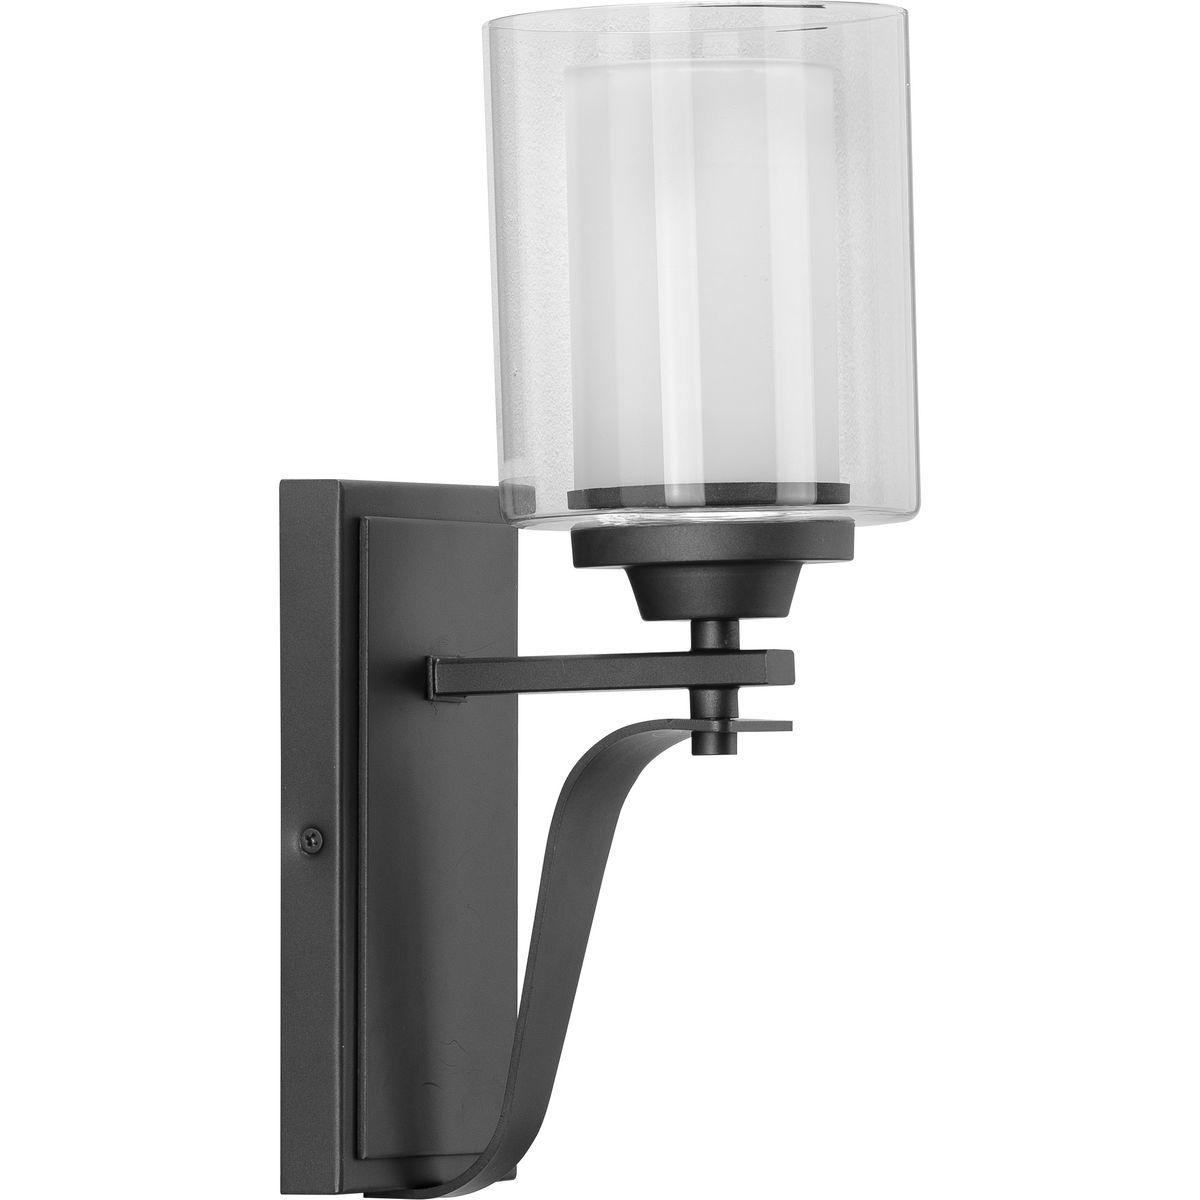 Kene Collection One-Light Graphite Clear Glass Craftsman Bath Vanity Light - Damp Location Listed